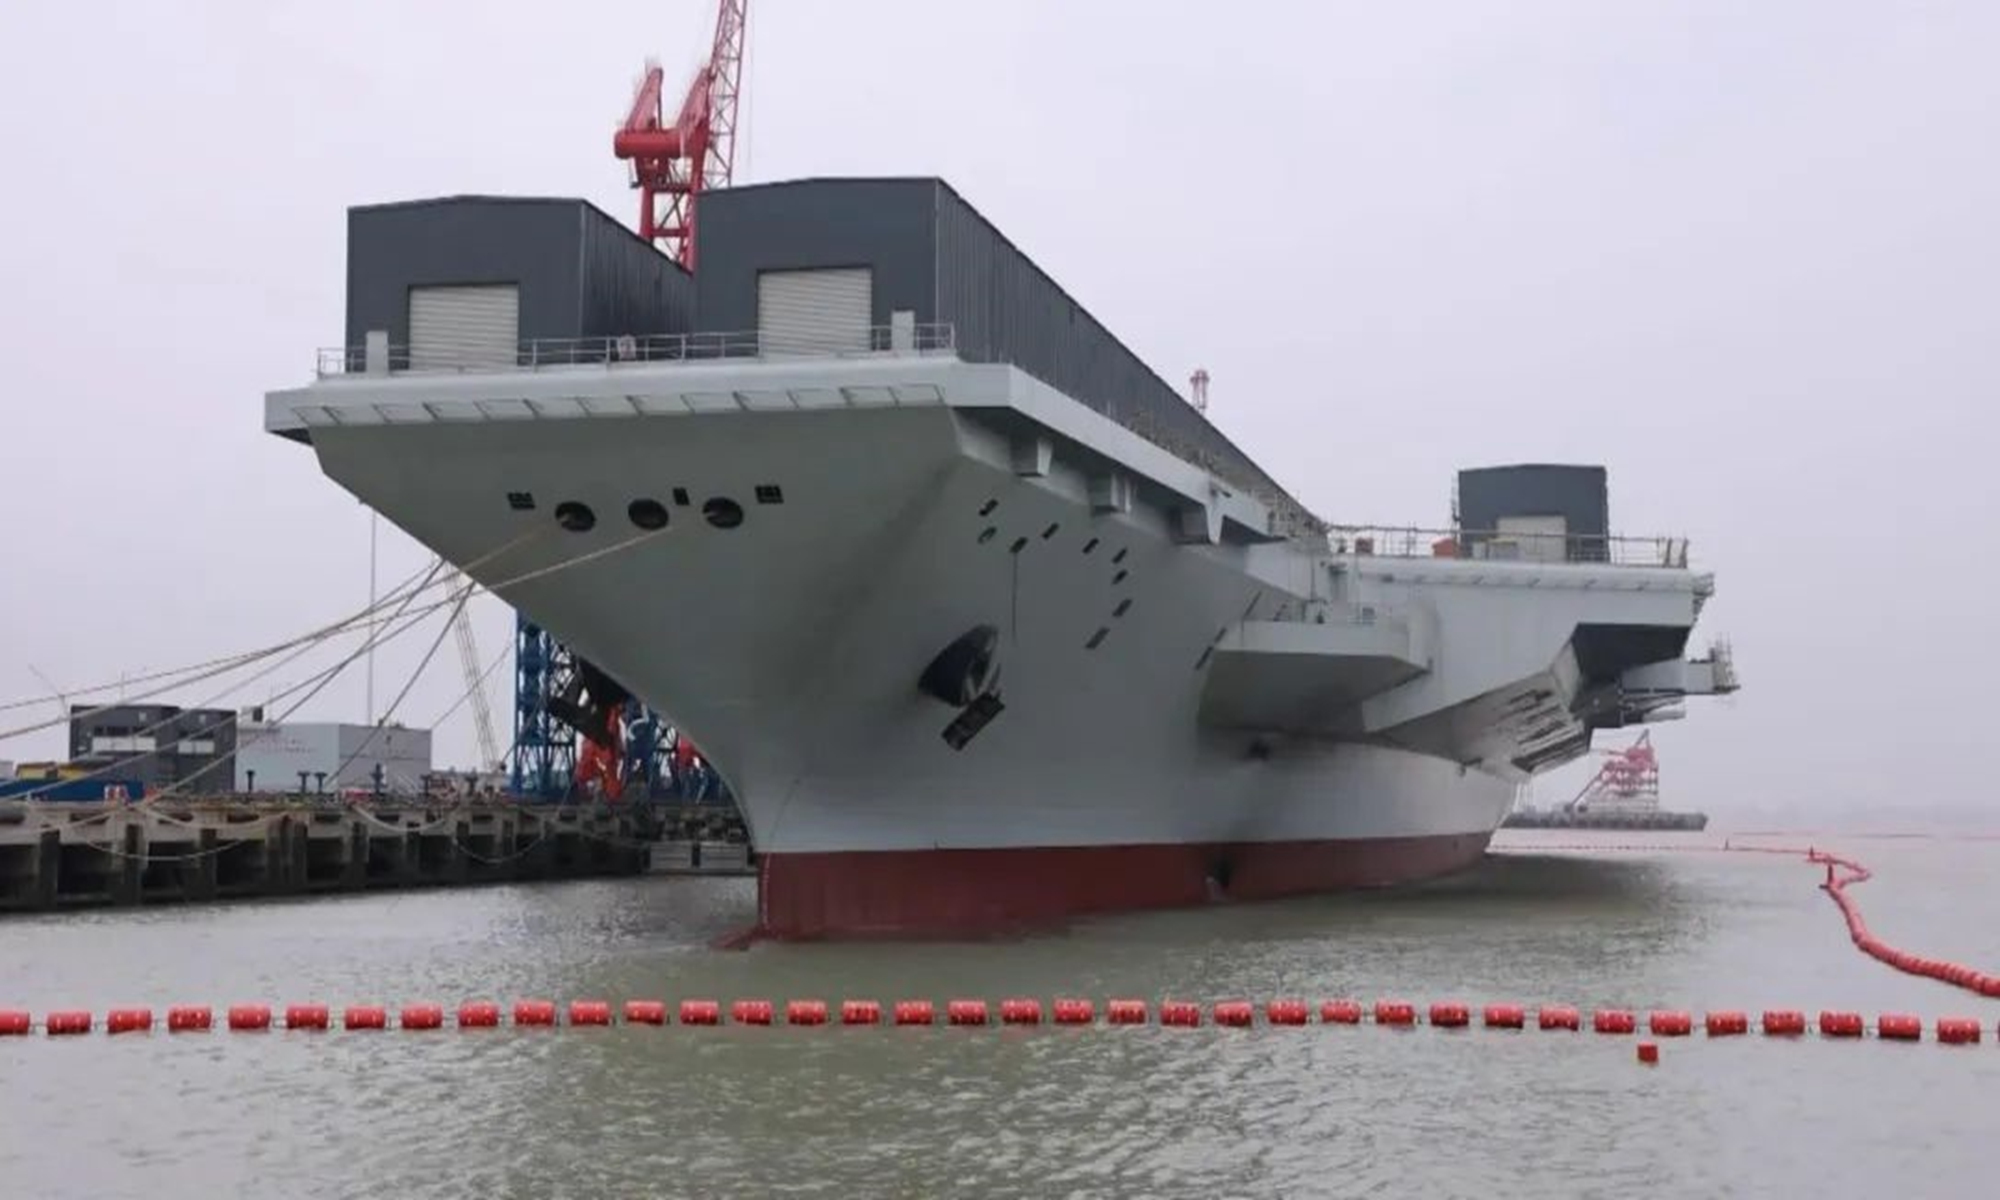 The <em>Fujian</em>, the third aircraft carrier of China, undergoes outfitting and mooring trials in Shanghai in early 2023. Photo: Screenshot from China Central Television